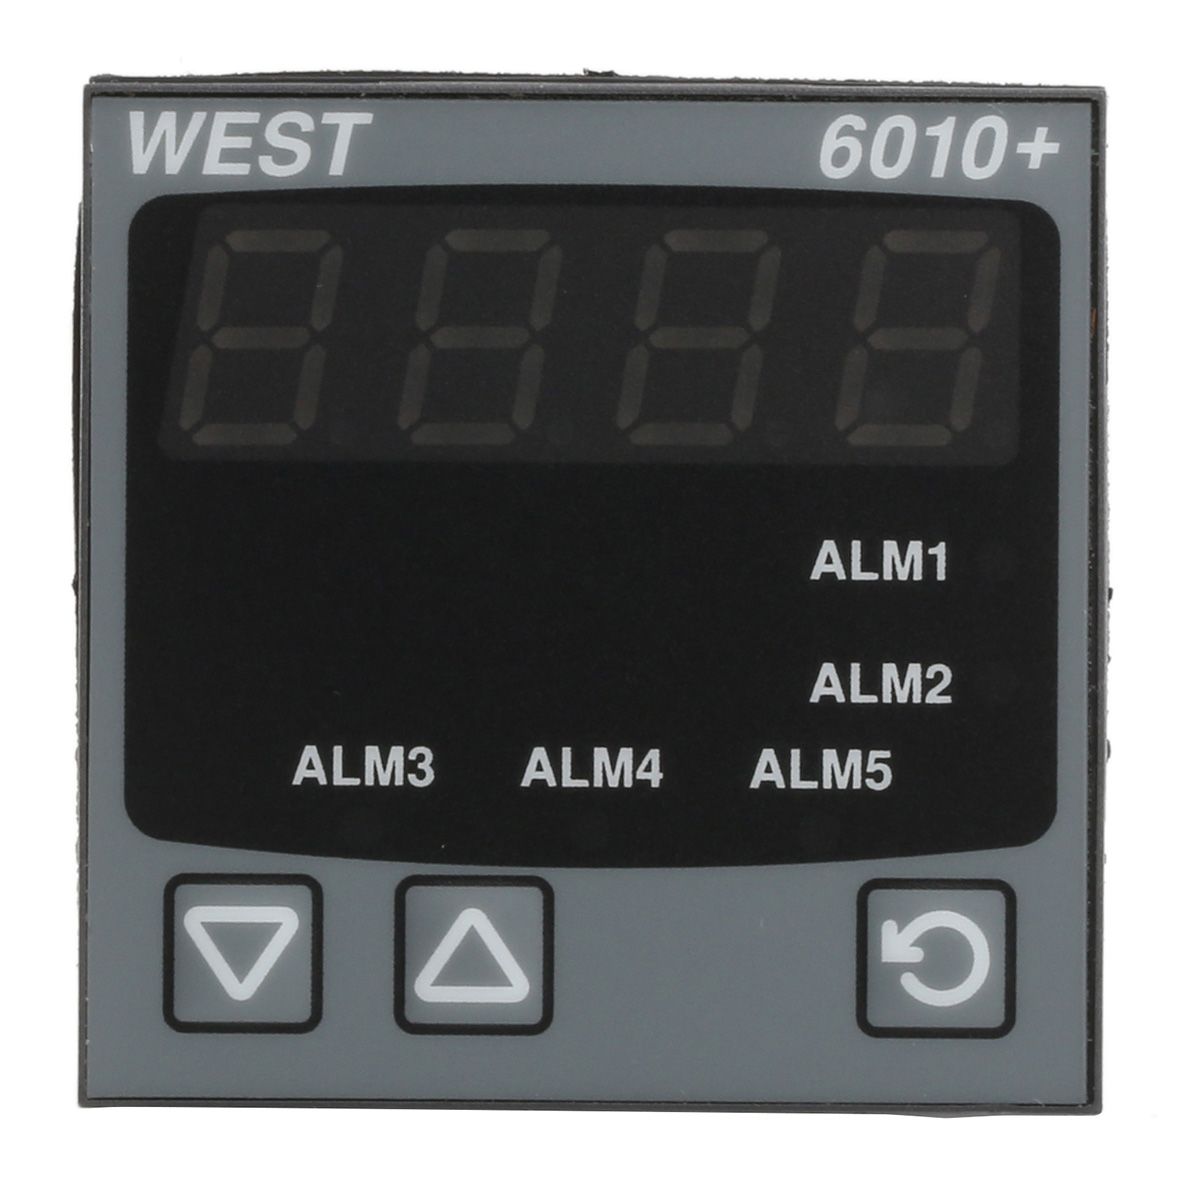 West Instruments P6010-2100-000 , LED Process Indicator for RTD, Thermocouples, 45mm x 45mm